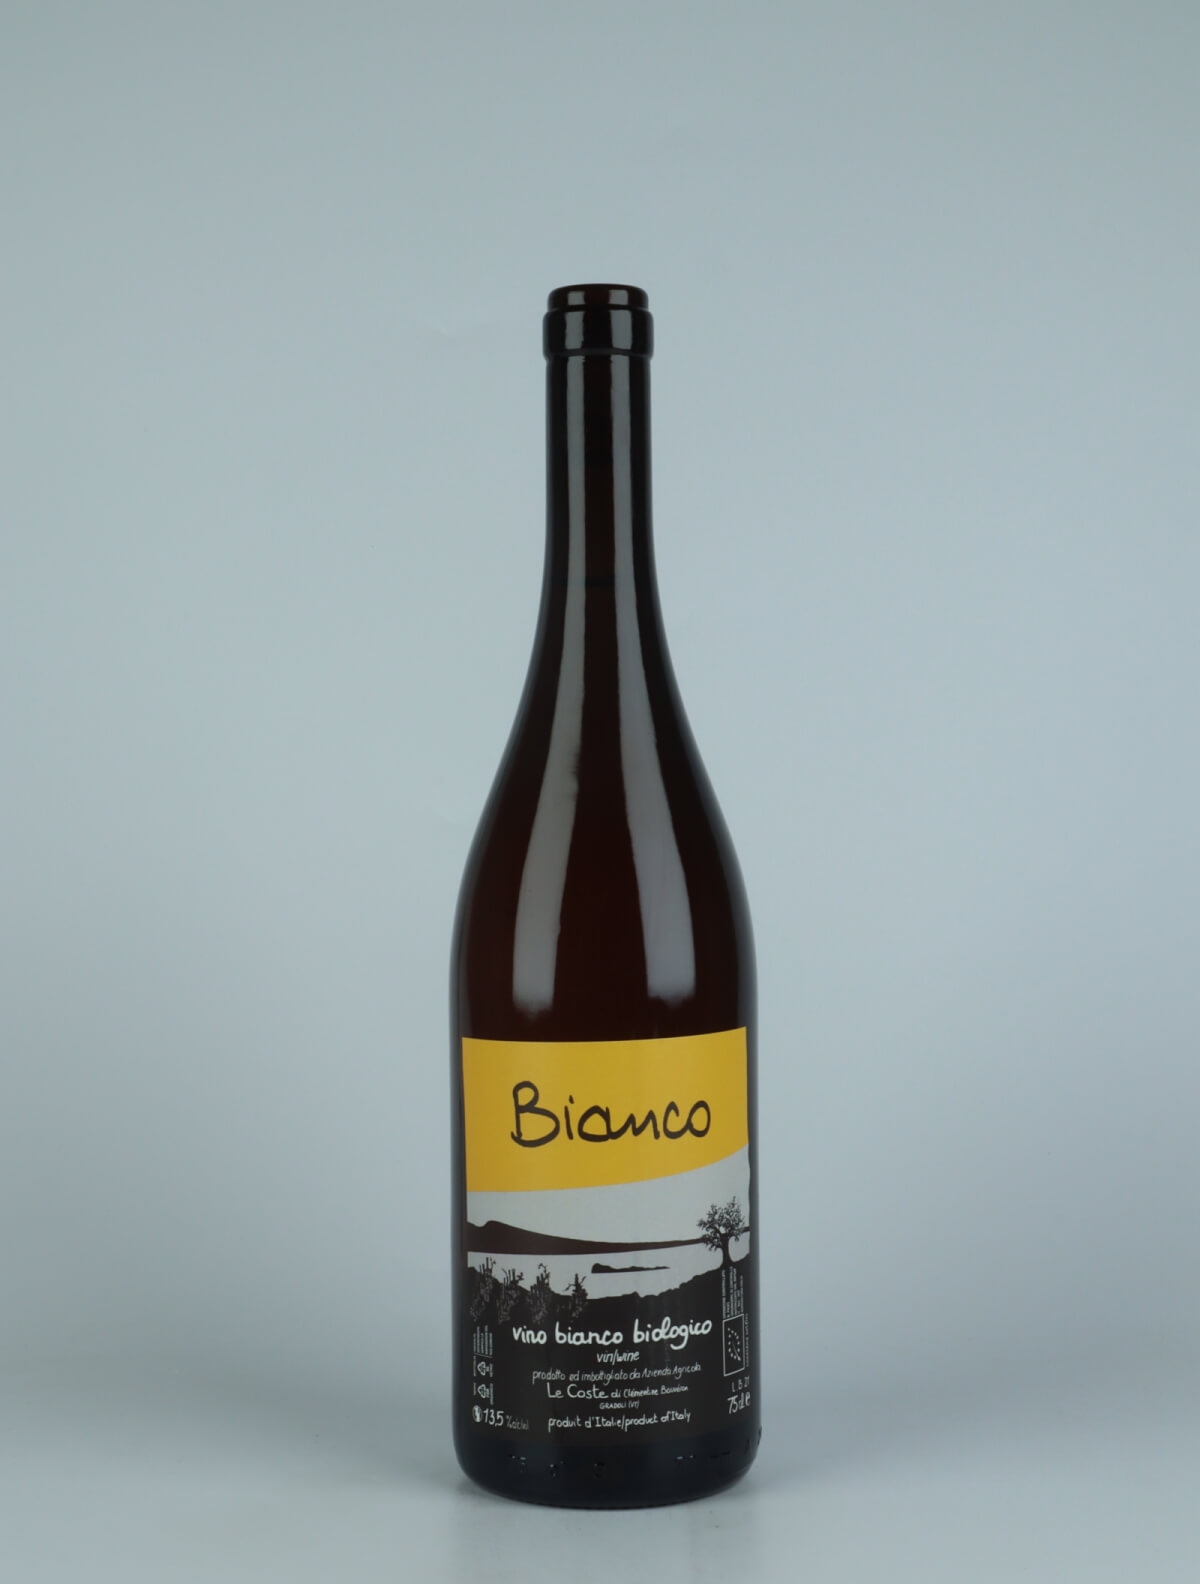 A bottle 2021 Bianco White wine from Le Coste, Lazio in Italy